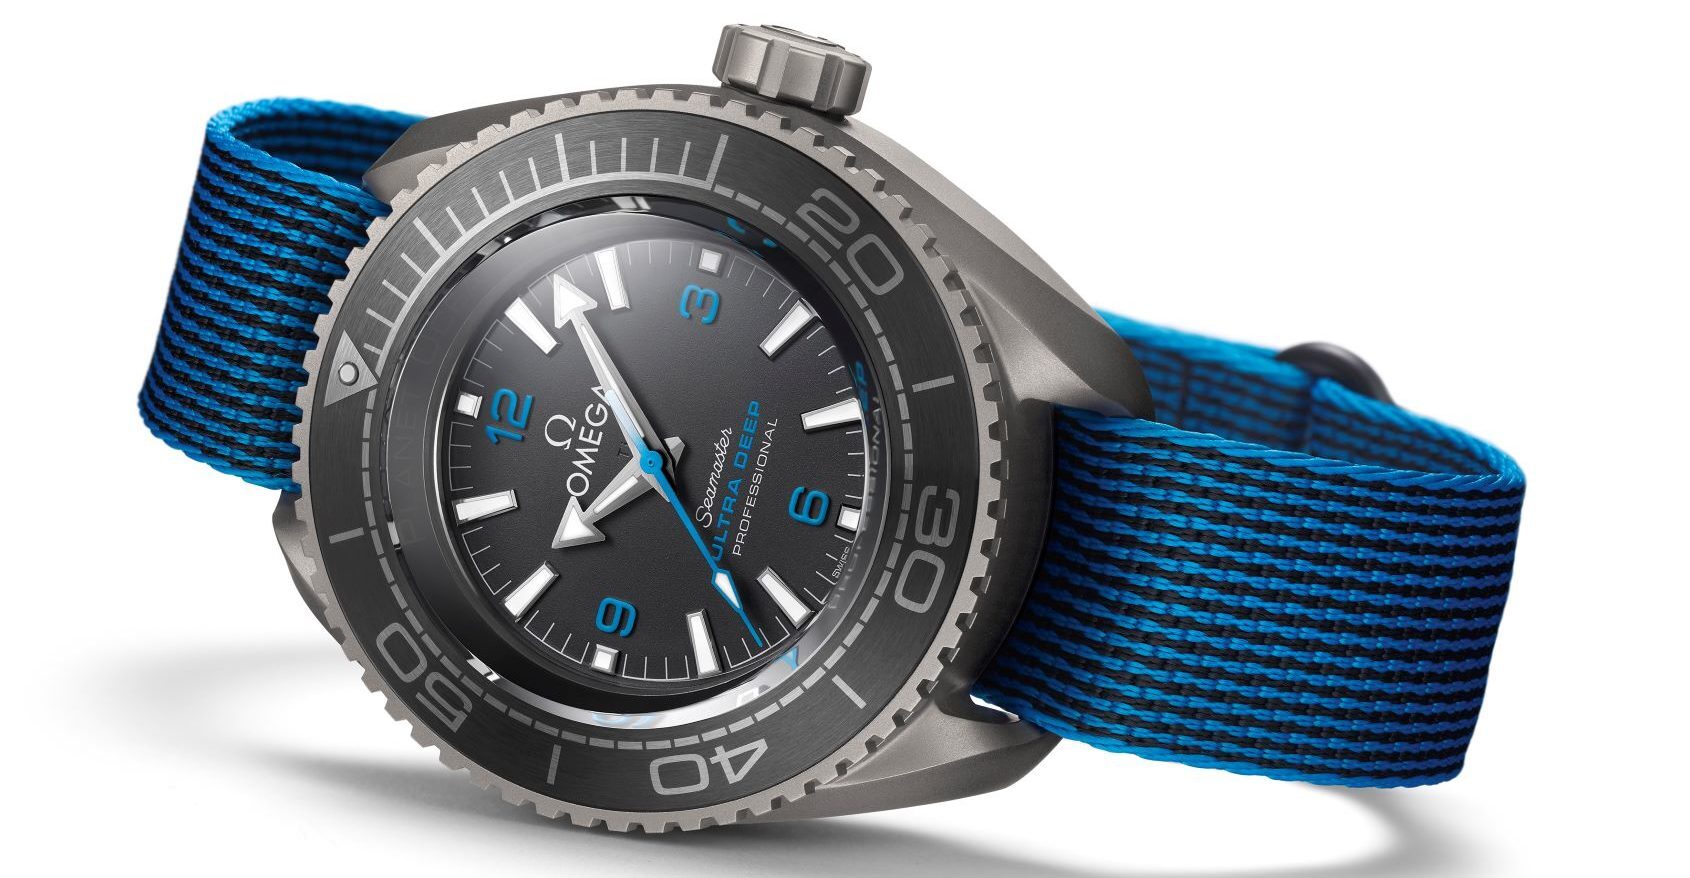 OMEGA Seamaster Planet Ocean Ultra Deep Professional The world’s deepest watch